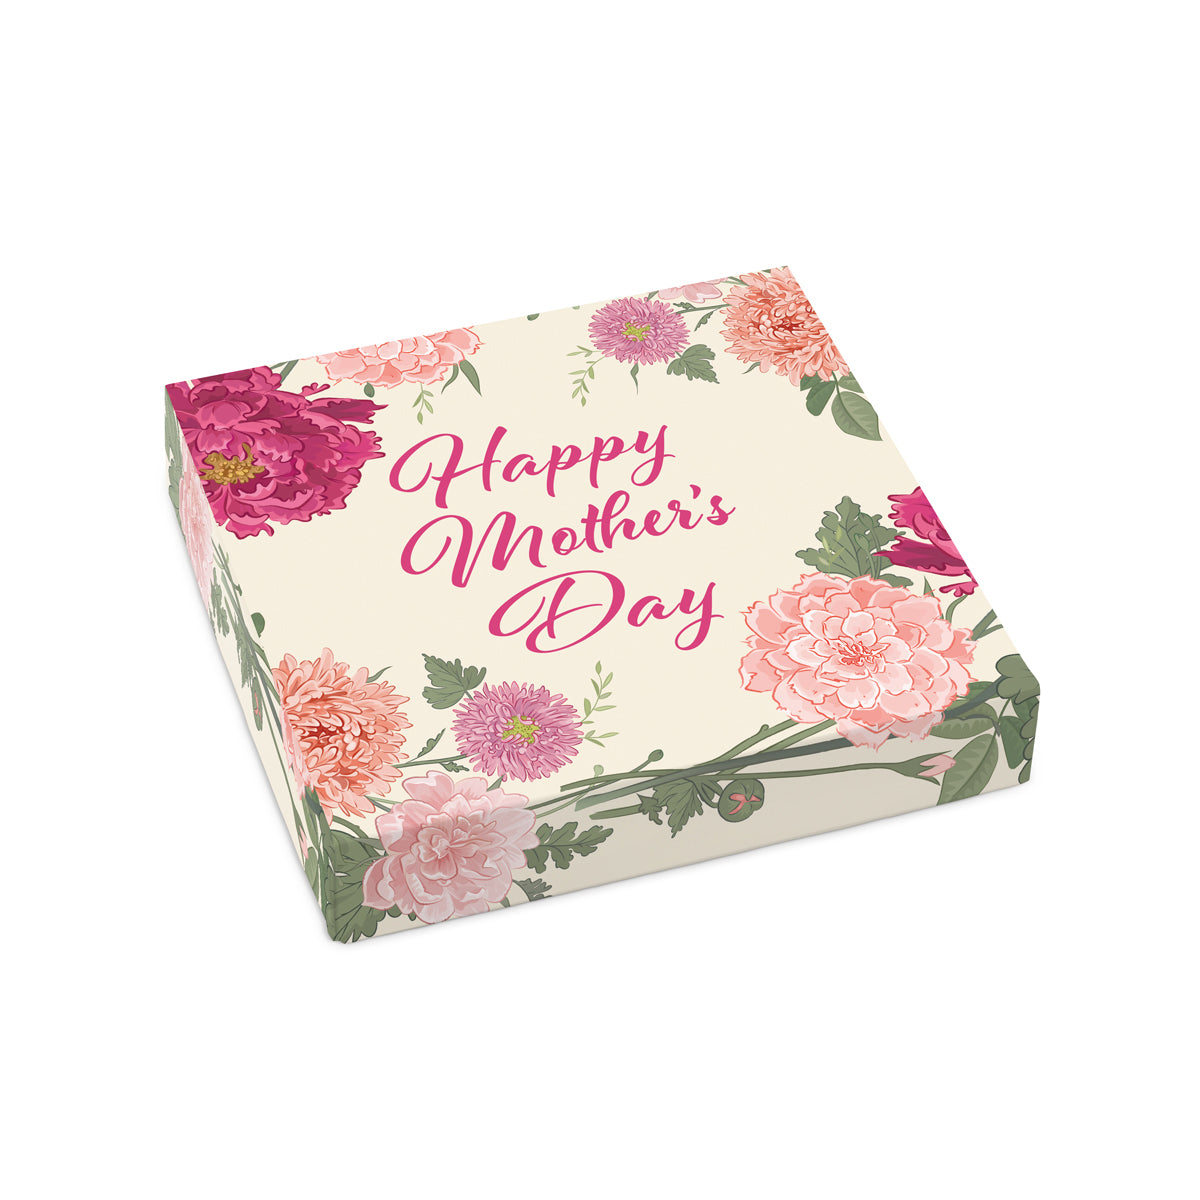 Happy Mother's Day Floral Cover for 9 Piece Chocolate Assortment